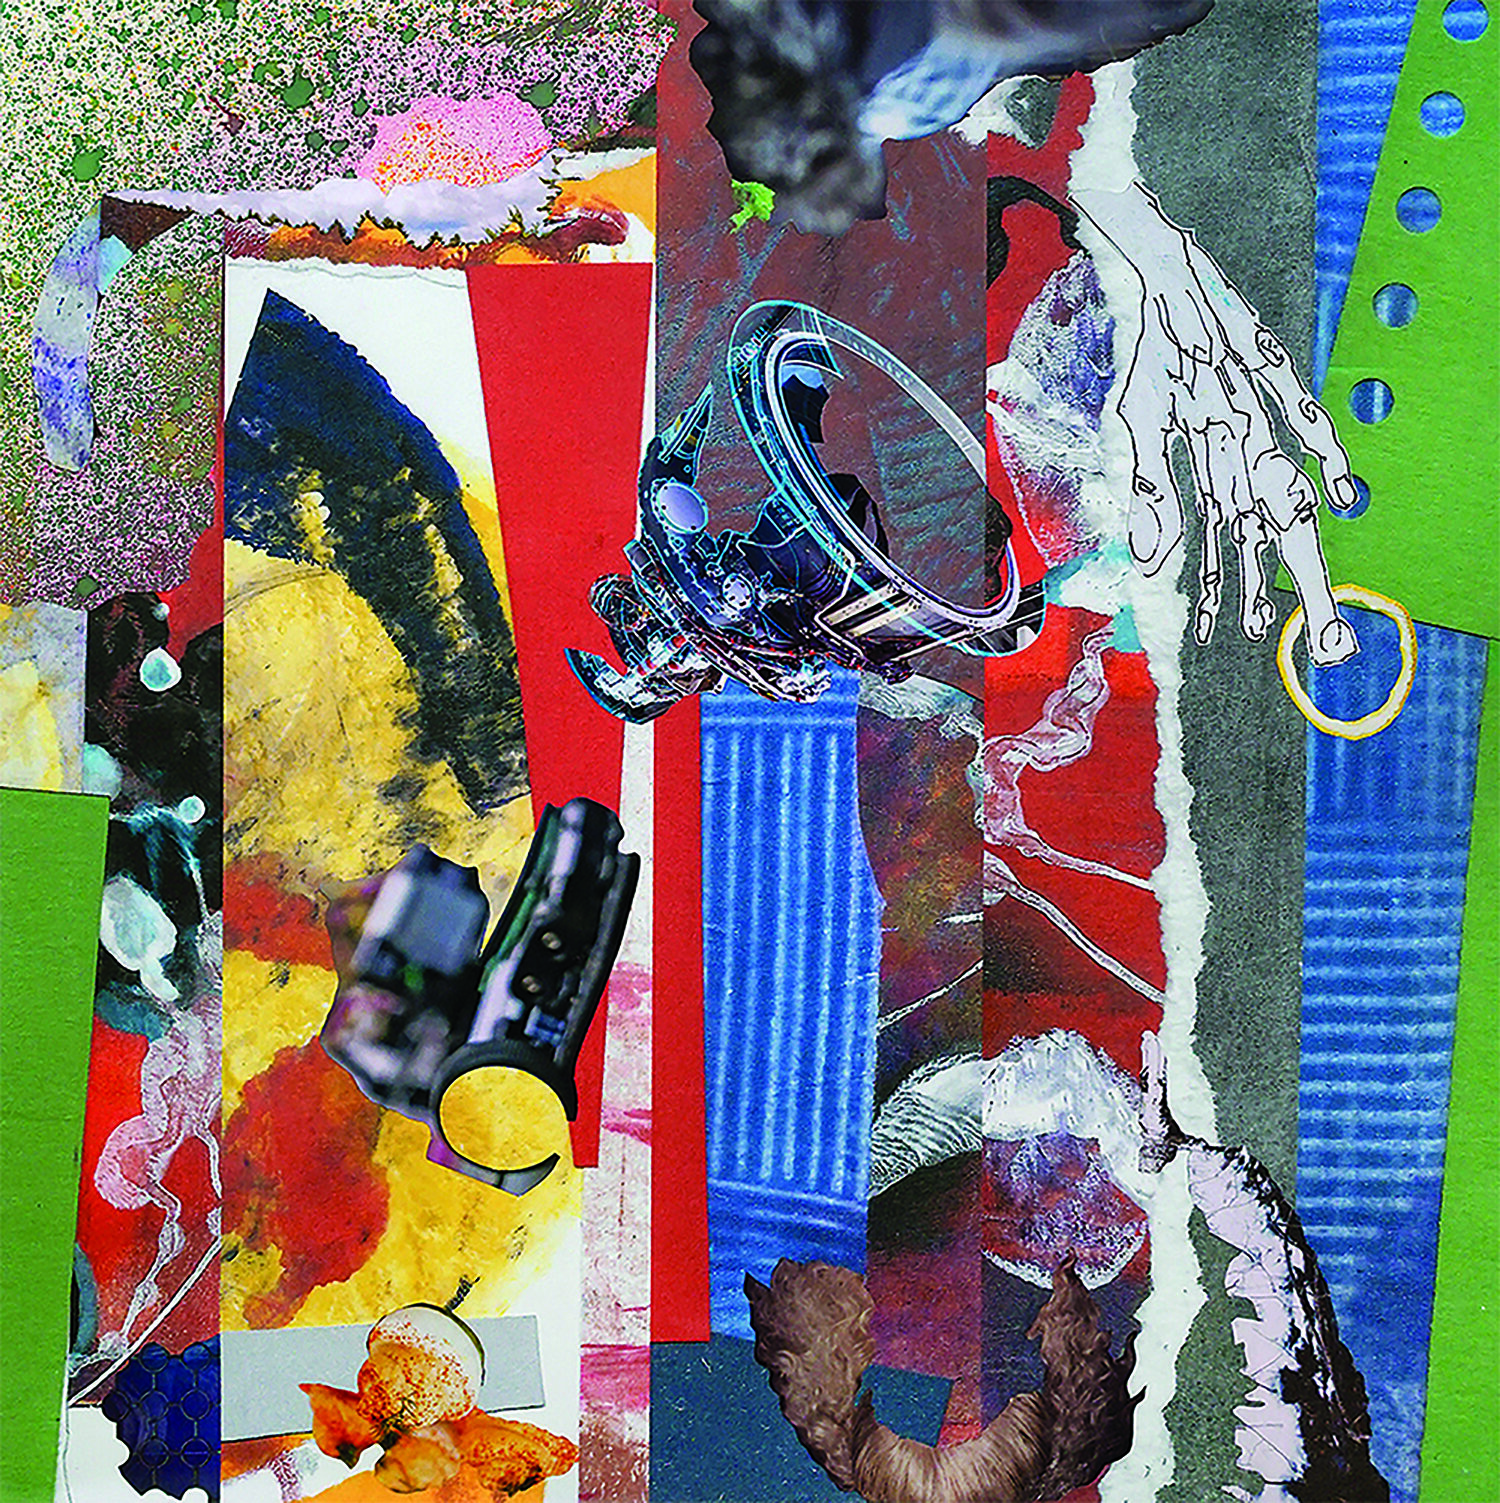    We didn’t take the plane-the plane took us!    Mixed media collage on watercolor paper, 30 x 22 inches 